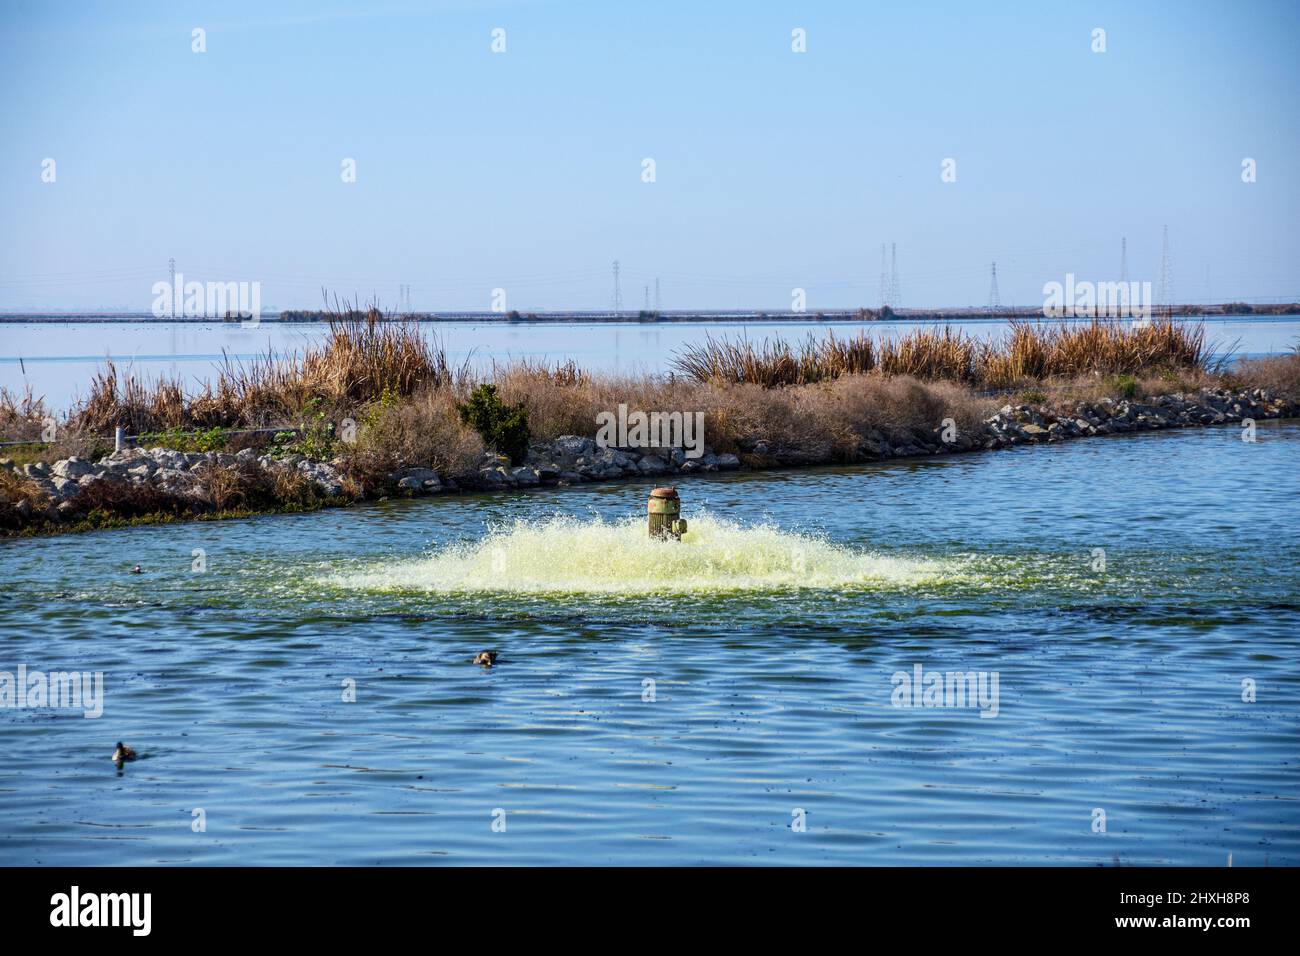 Working pump aerating and filtering contaminated water in wastewater treatment facility pond to remove pollutants and dissolved gases. Dam separates o Stock Photo